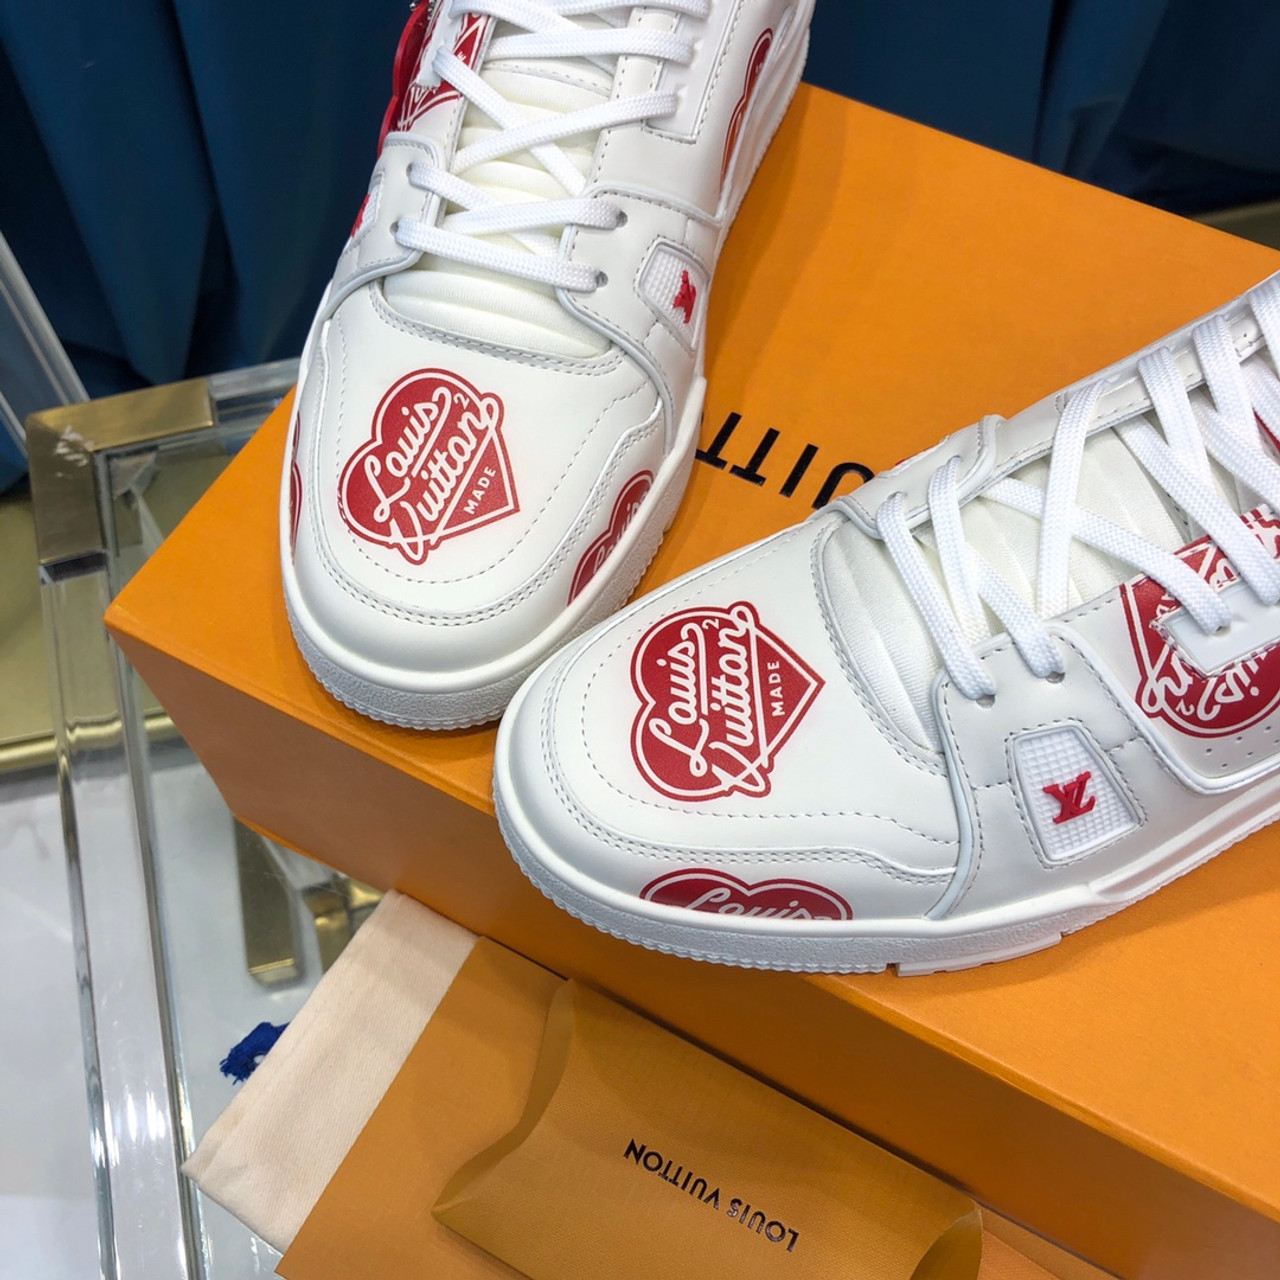 Wholesale Louis's Vuitton's Replica Lv's Balenciaga's Brand Gucci's  Designer Nike's Jordan's 4 Factory in China Online Store Adidas's Branded  Shoes 232e3 - China Shoes and Branded Shoe price